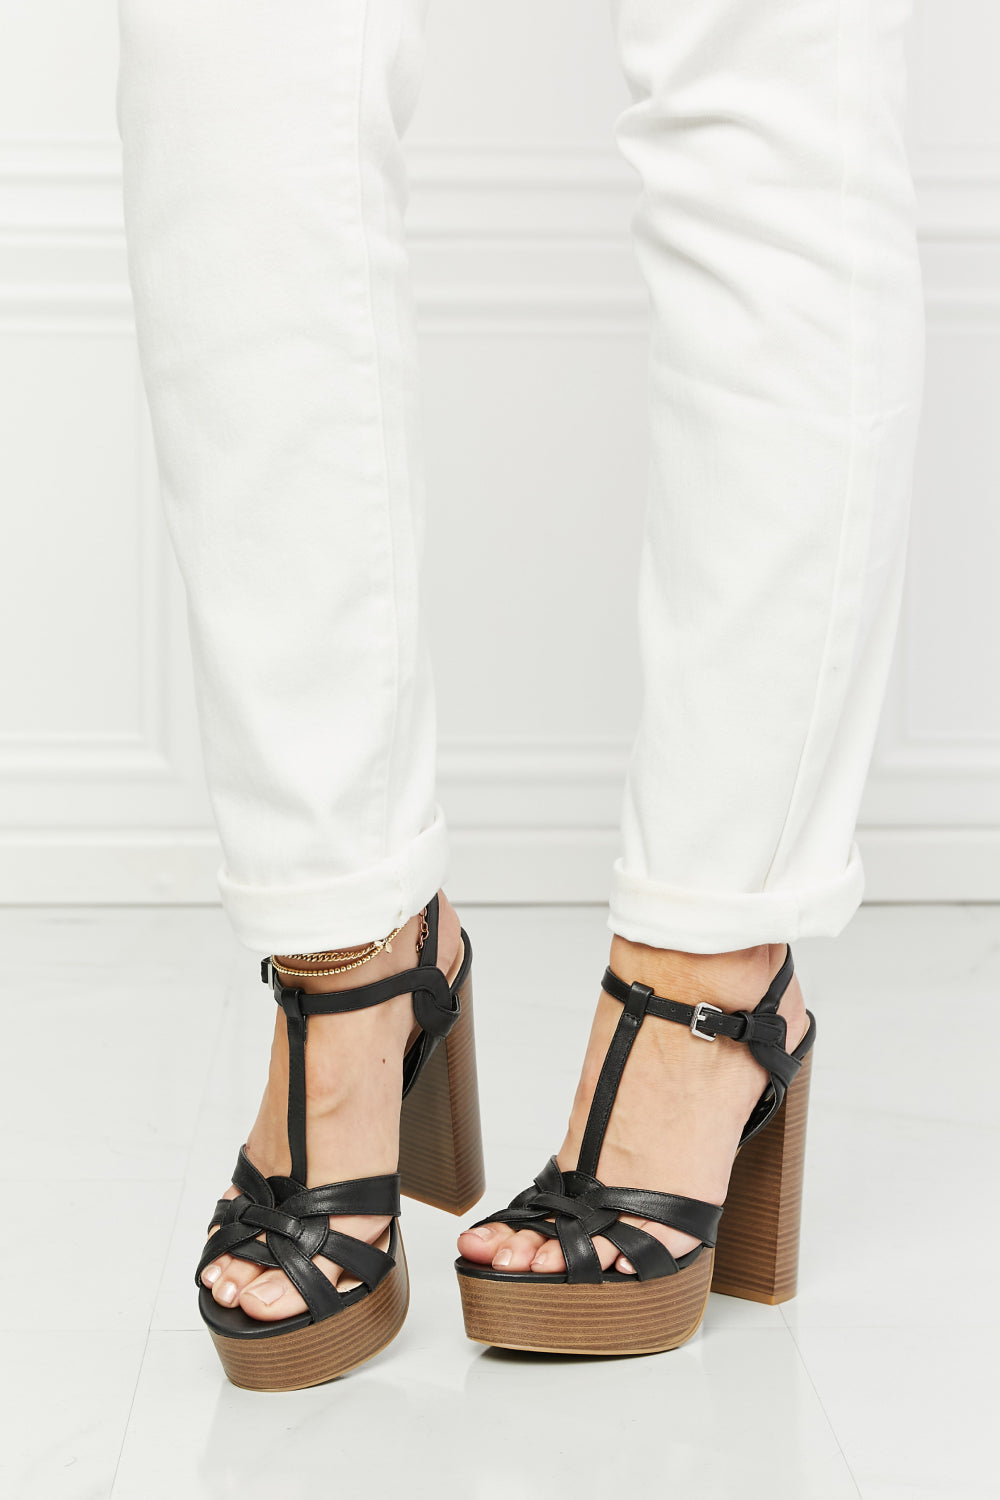 Legend She's Classy Strappy Heels - Cheeky Chic Boutique